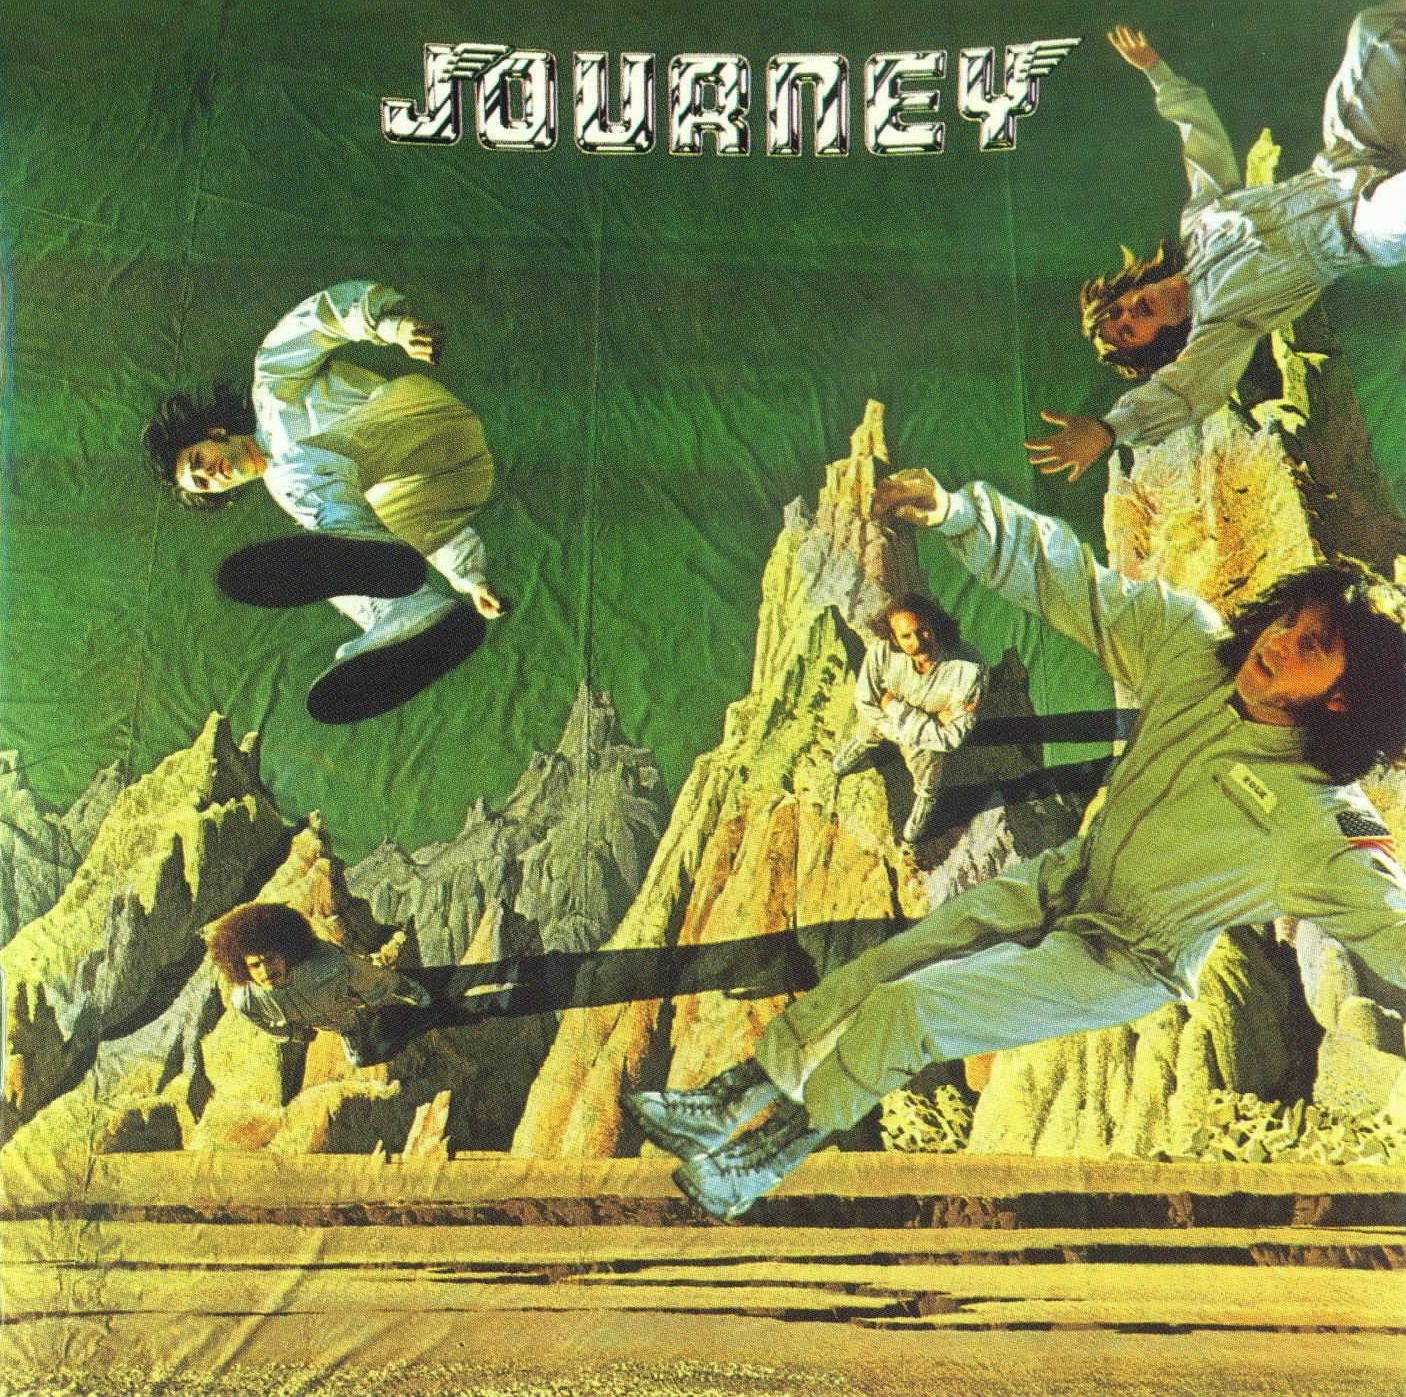 journey by steve perry